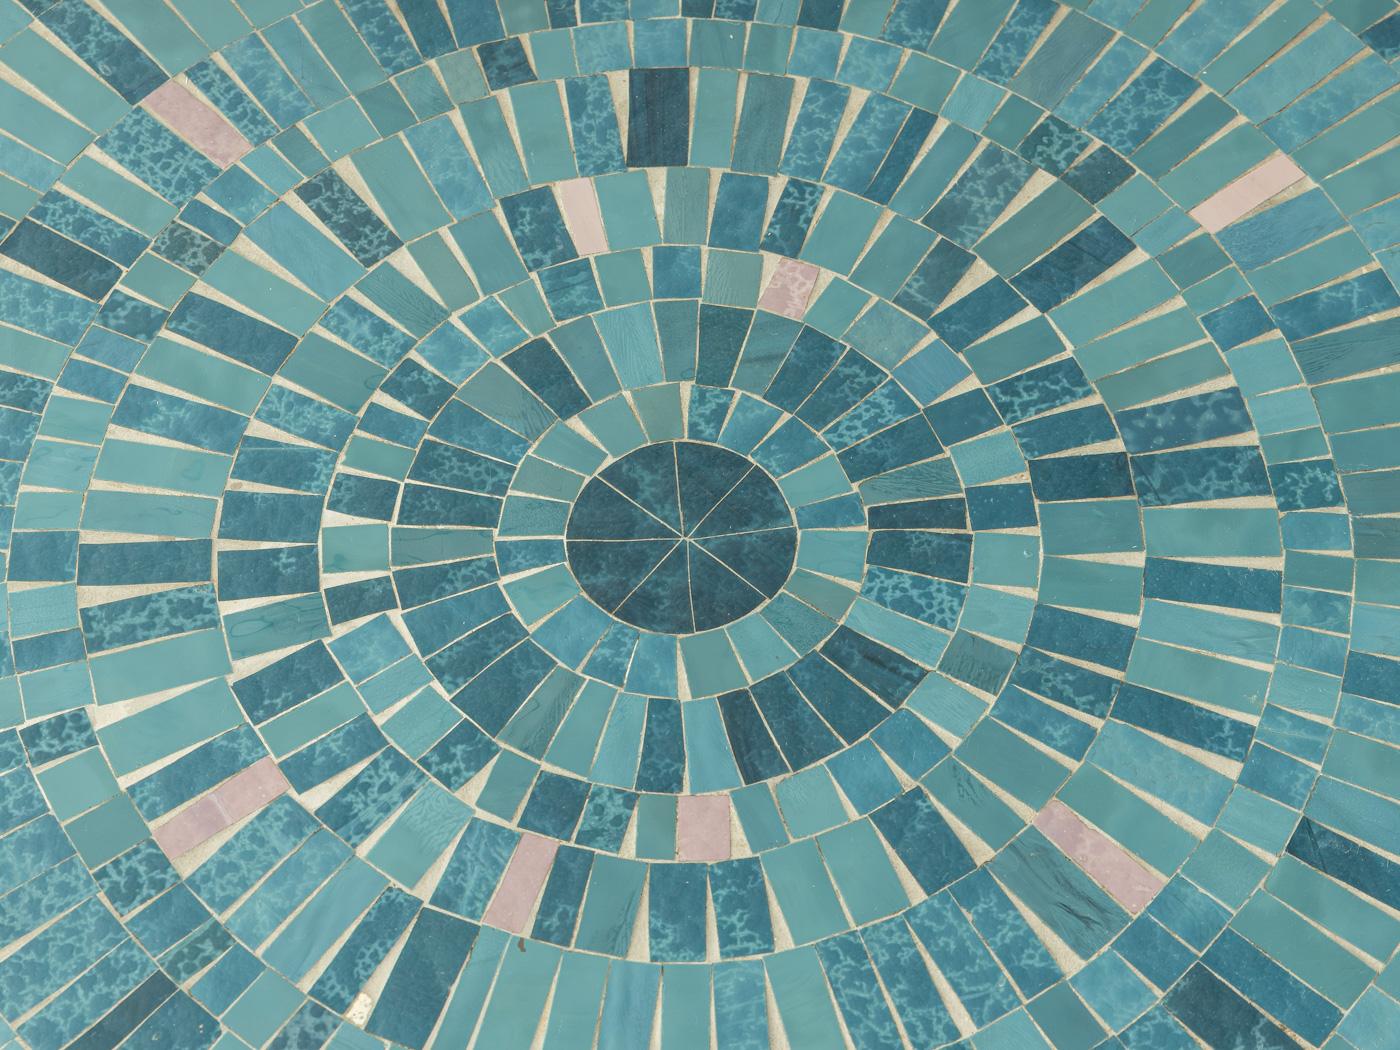 Berthold Müller-oerlinghausen Mosaic Coffee Table, Turquoise and Grey, 1960s 1